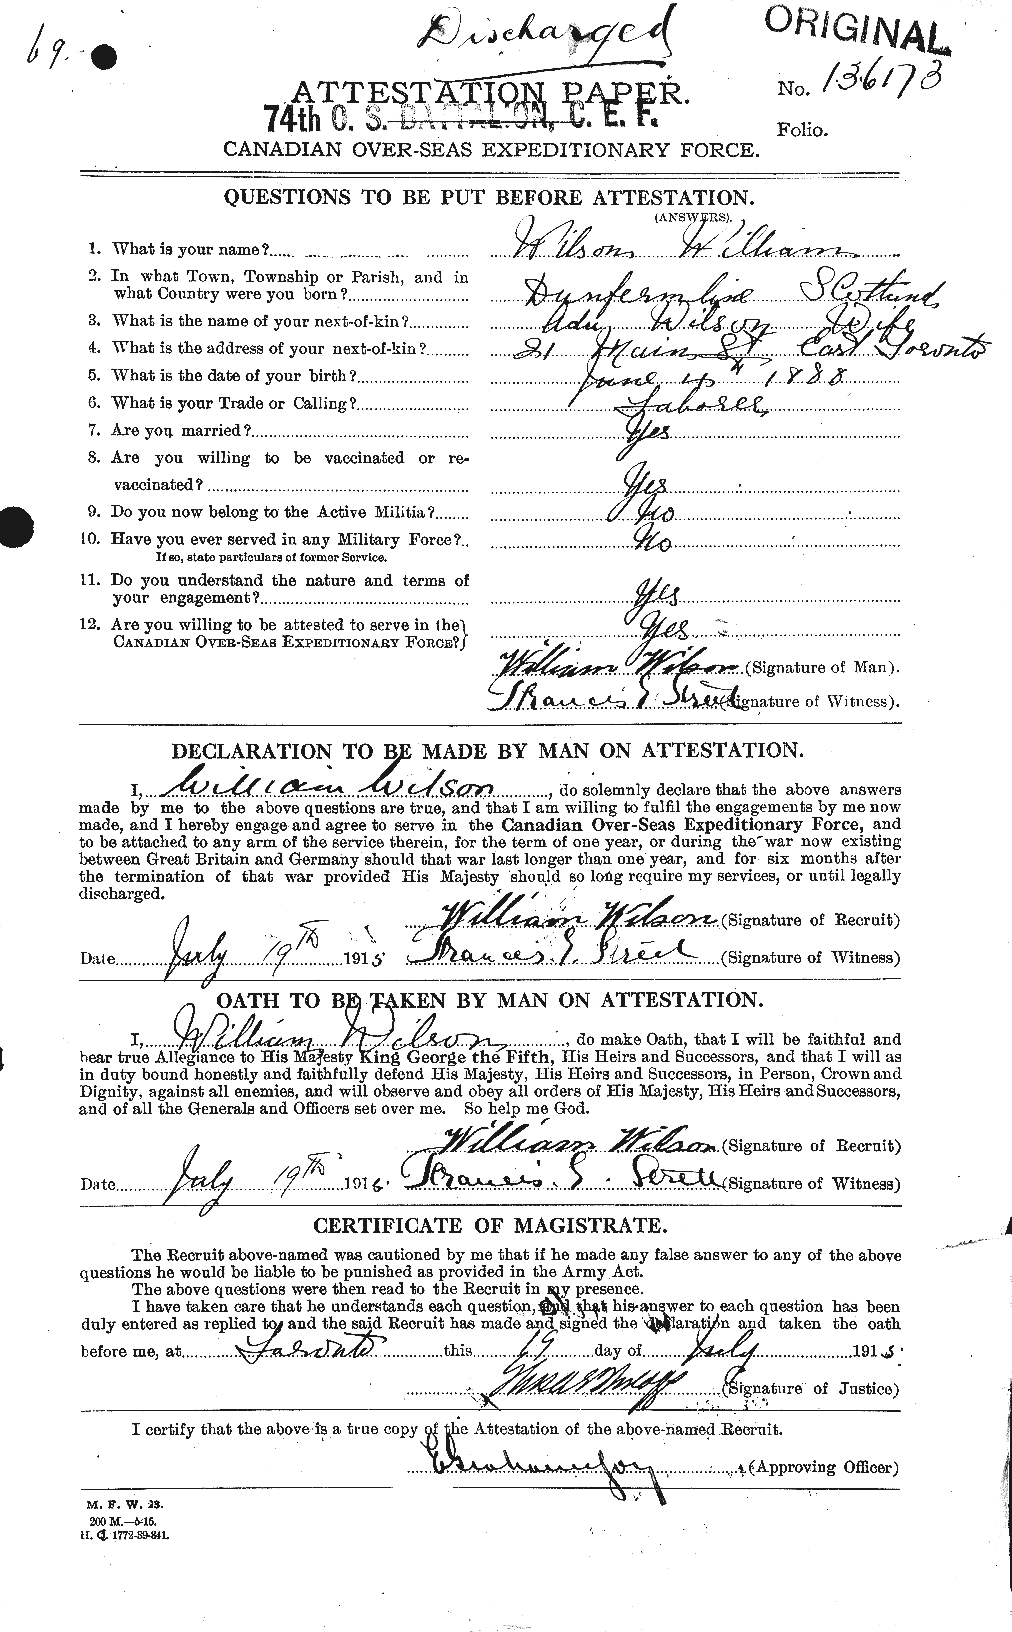 Personnel Records of the First World War - CEF 681867a